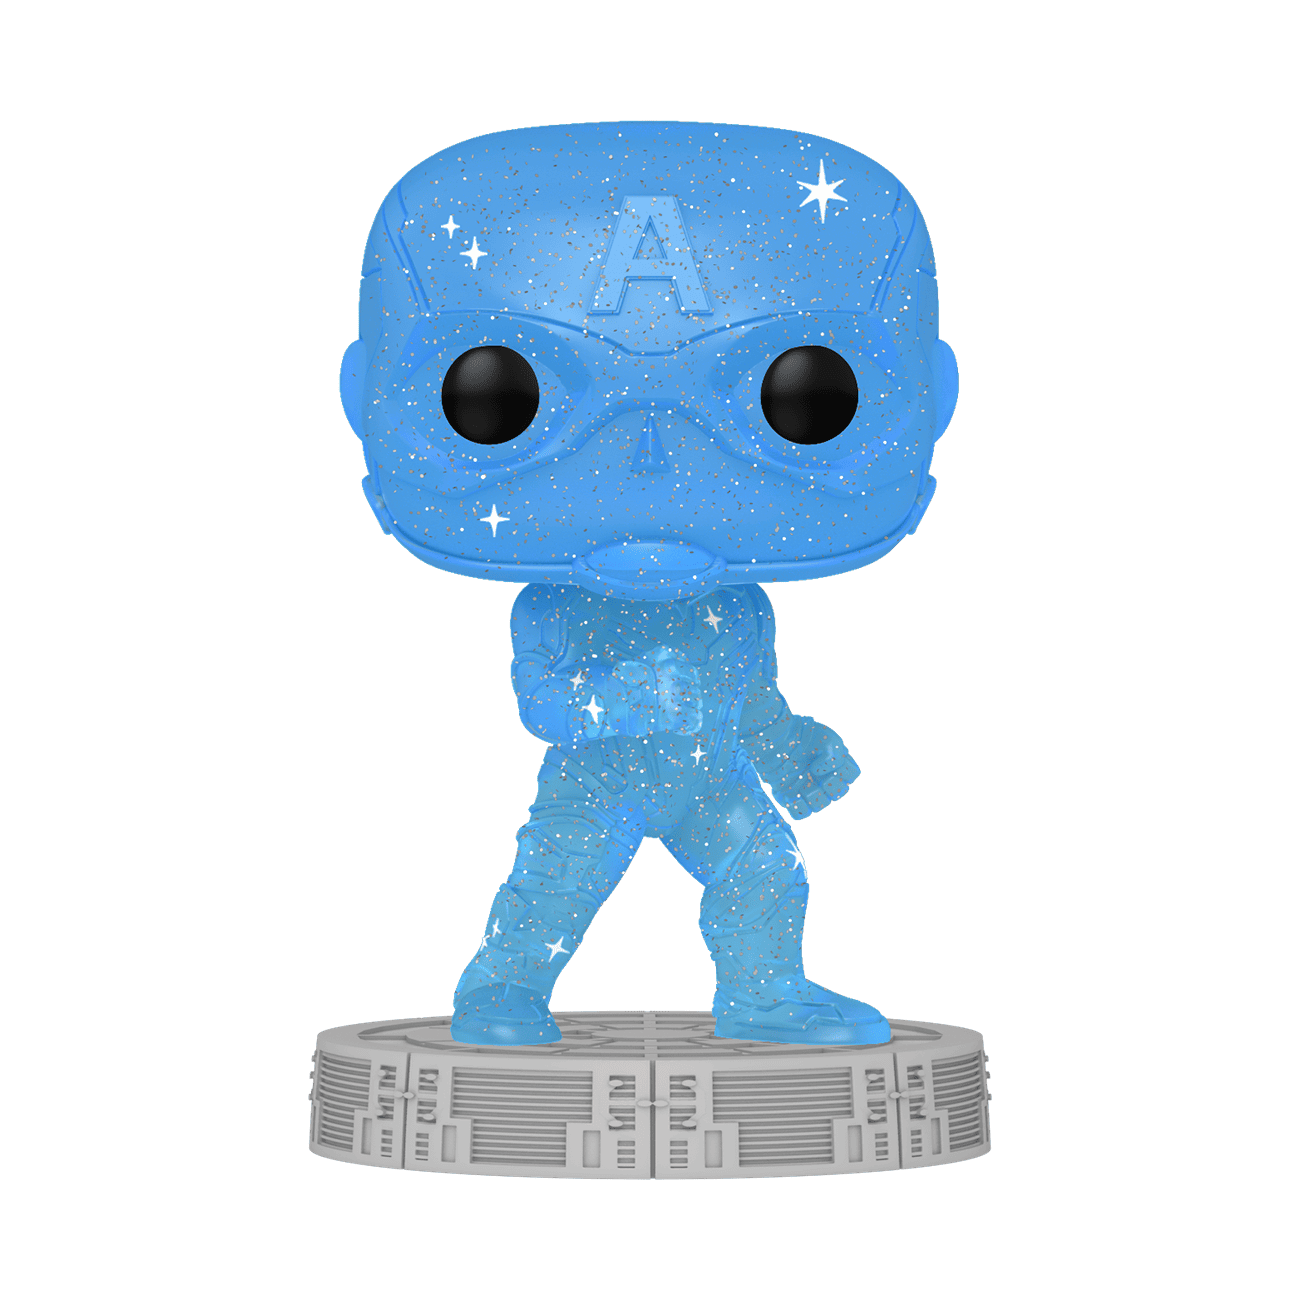 Buy Pop! Artist Series Captain America with Pop! Protector at Funko.